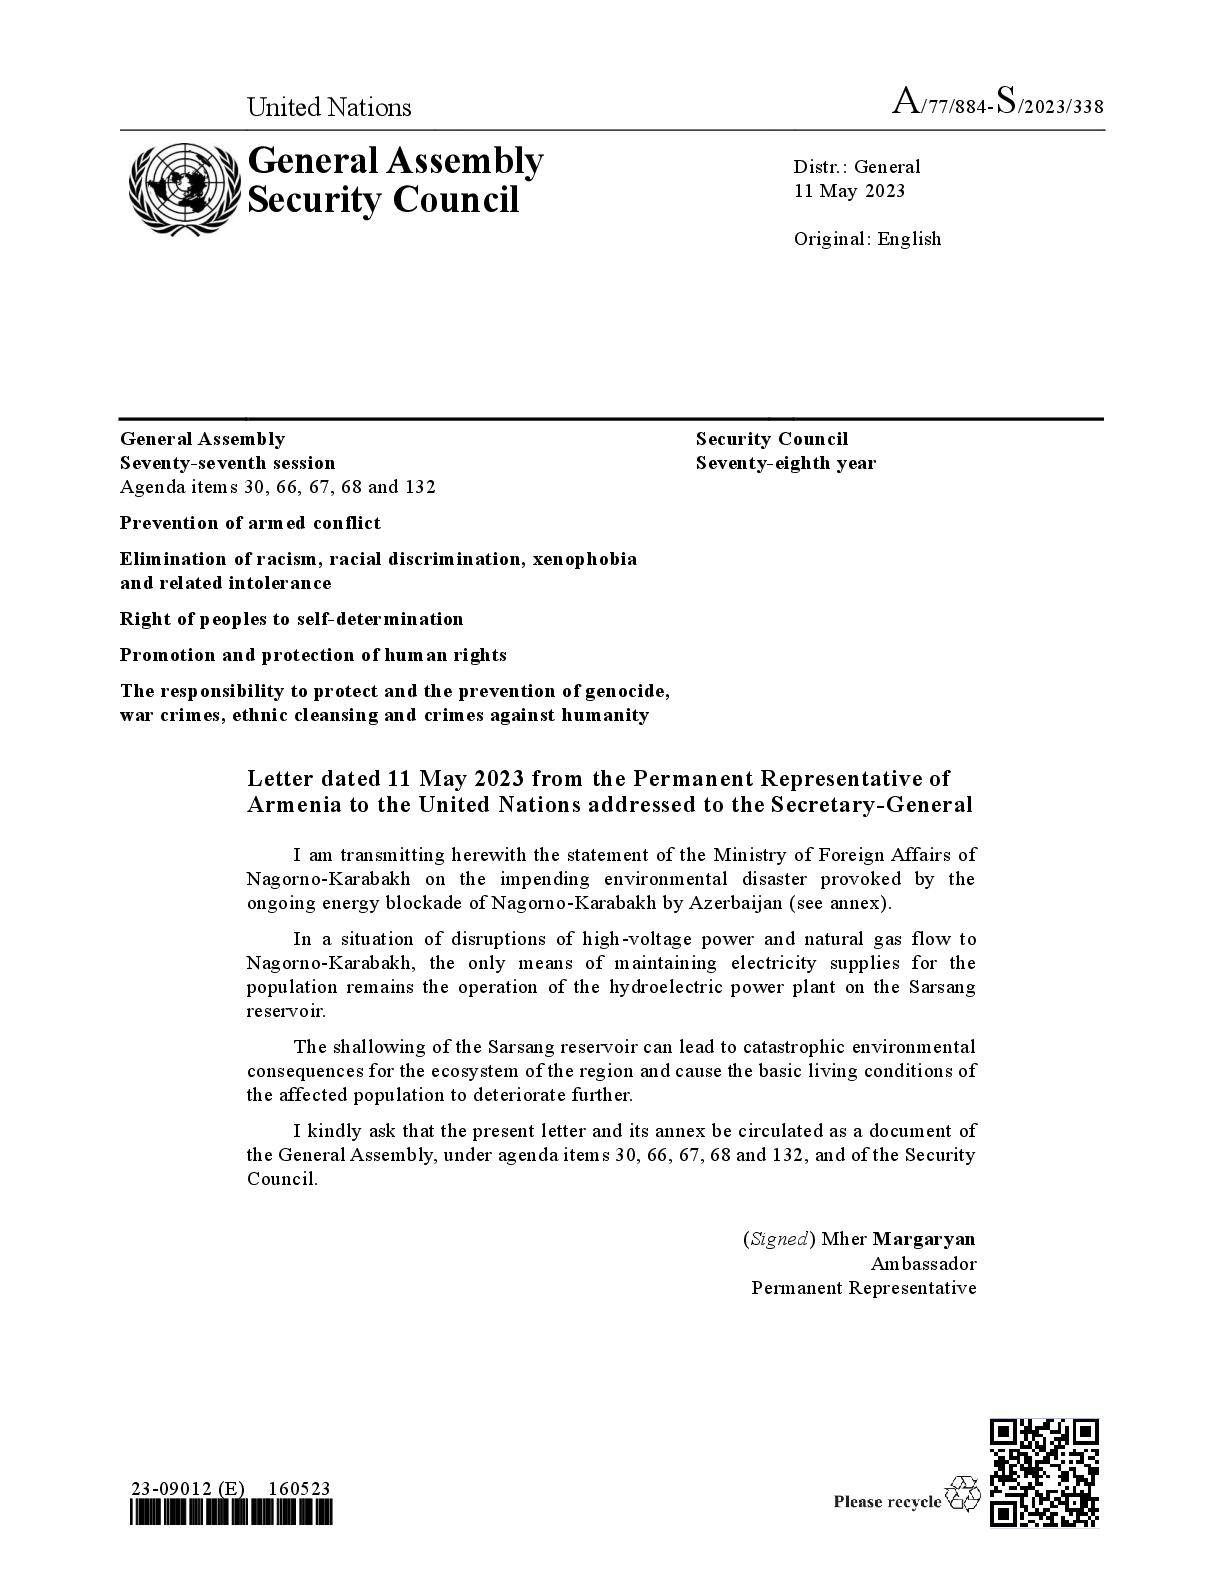 Letter from the Permanent Representative of Armenia on the impending environmental disaster provoked by the ongoing energy blockade of Nagorno-Karabakh by Azerbaijan